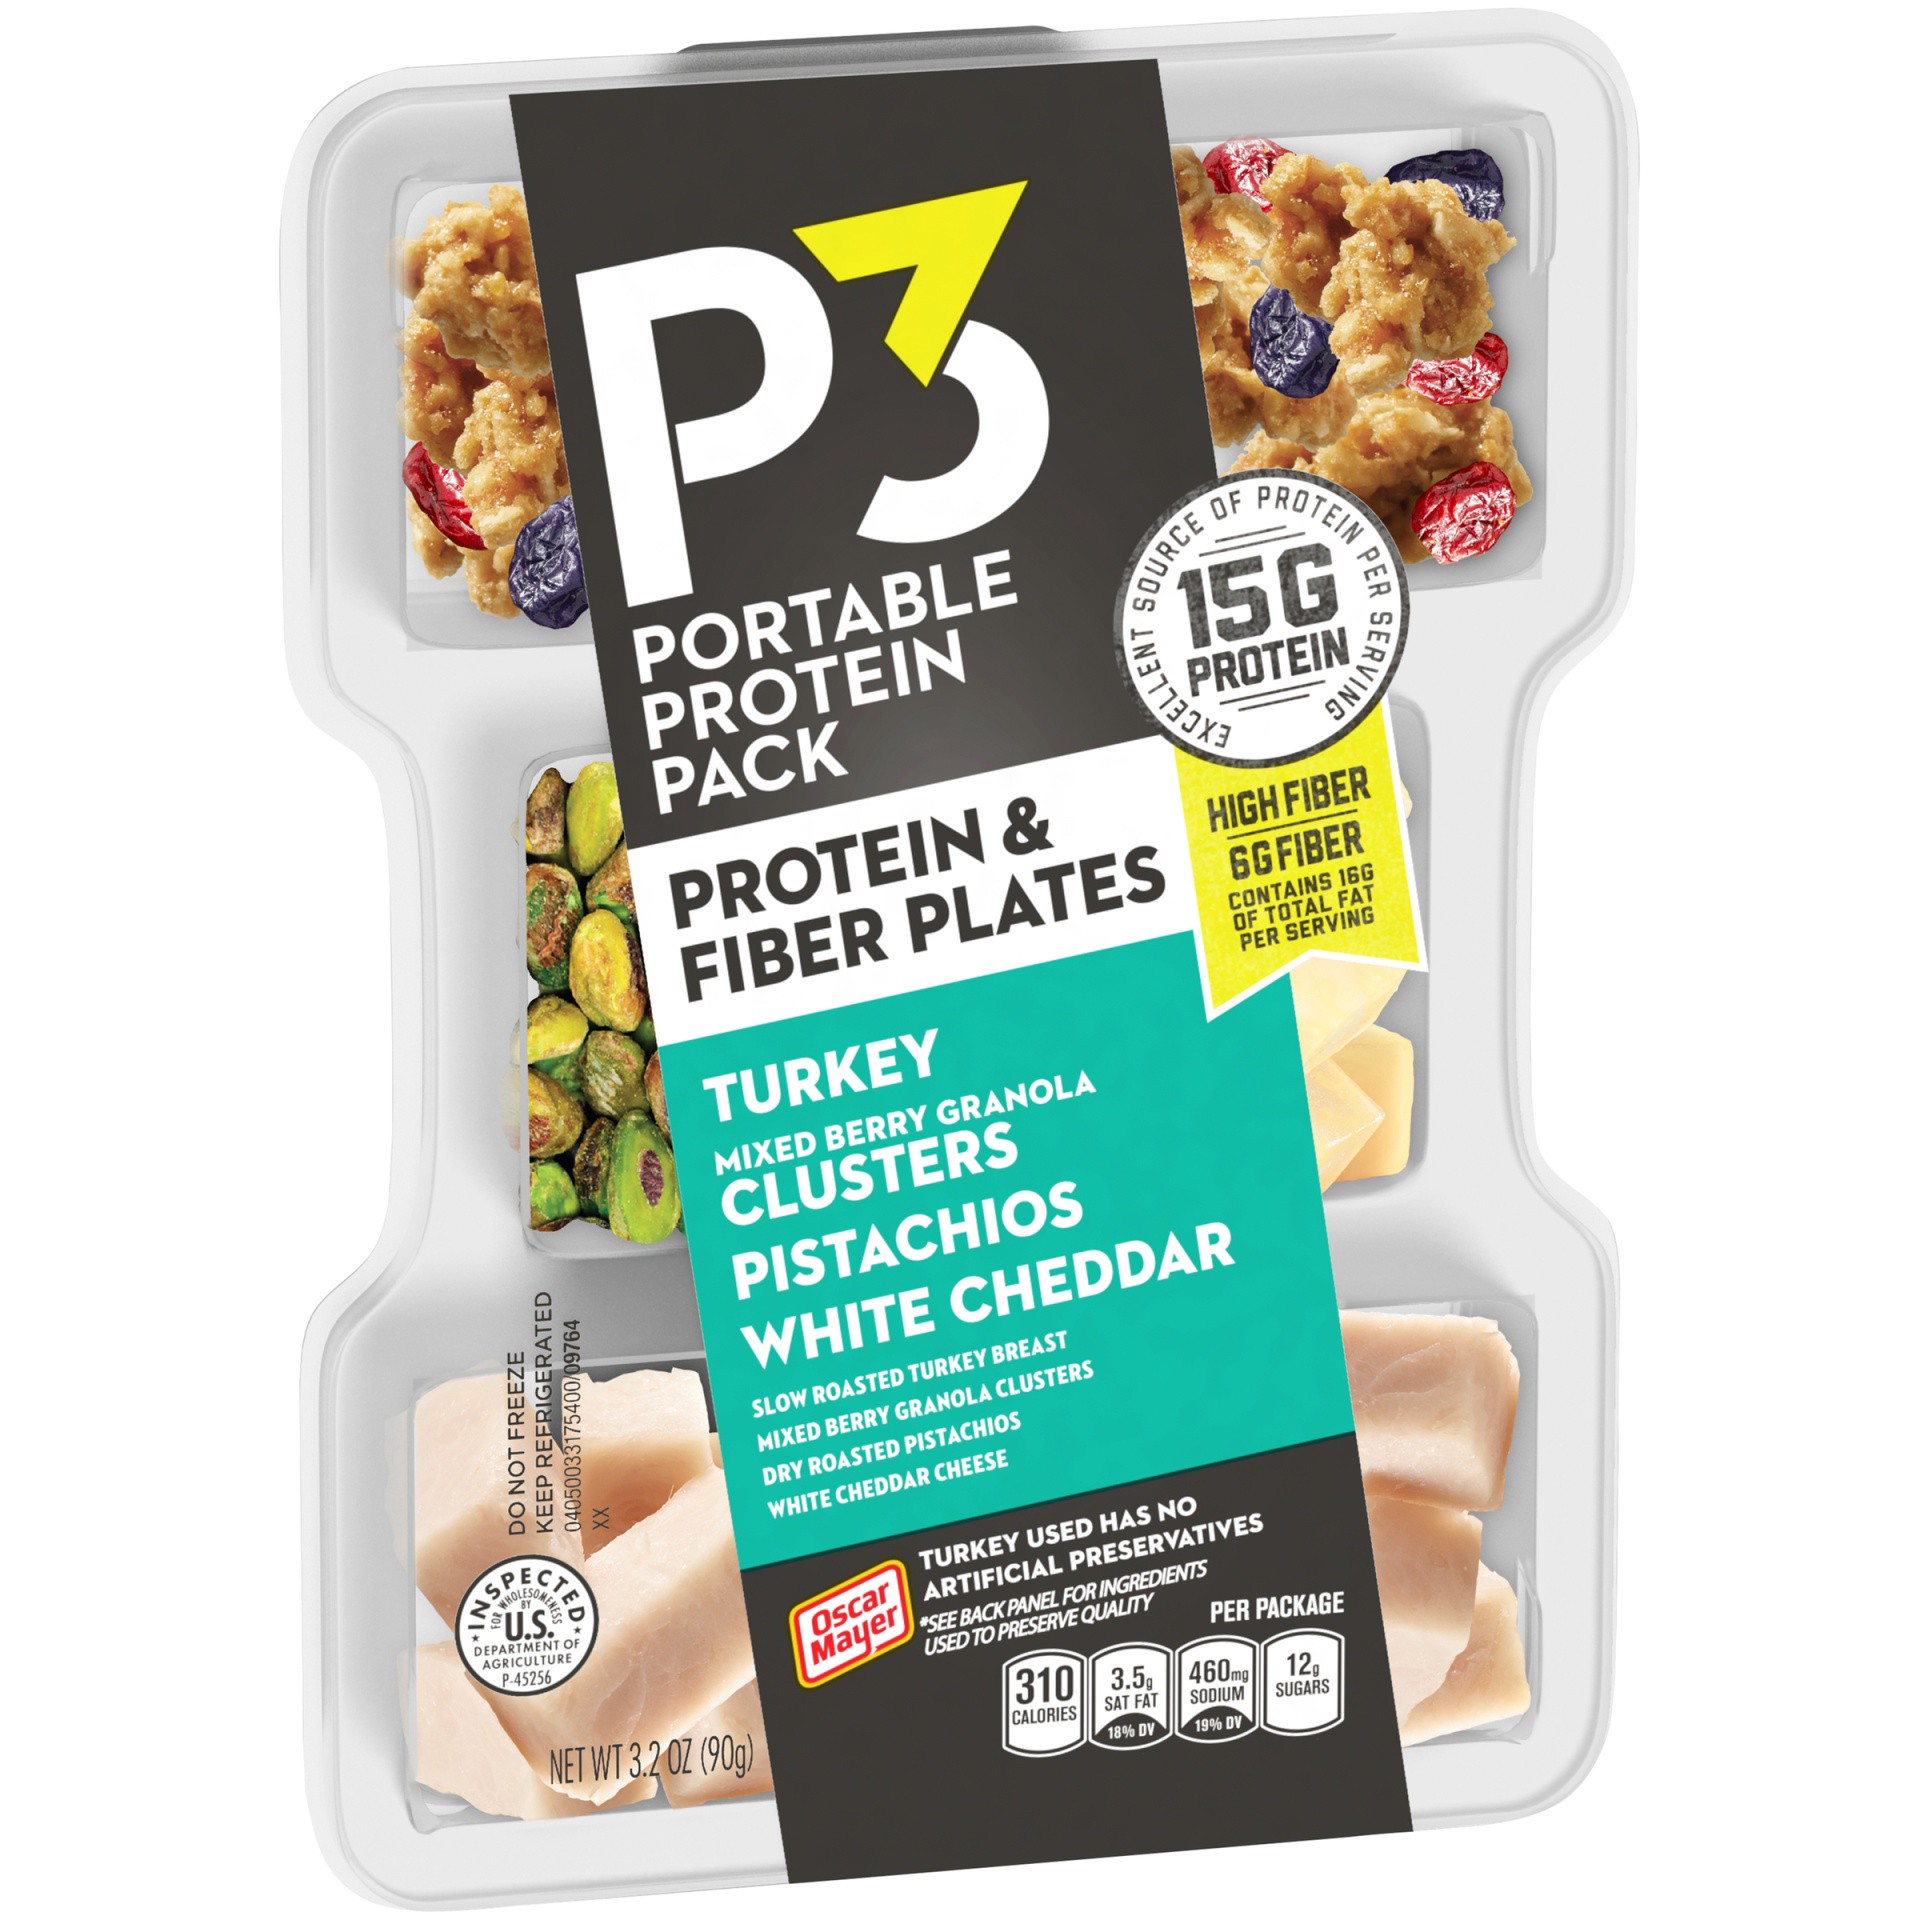 slide 2 of 6, P3 Portable Protein Snack Pack & Fiber Plate with Turkey, Mixed Berry Granola Clusters, Pistachios & White Cheddar Cheese Tray, 3.2 oz